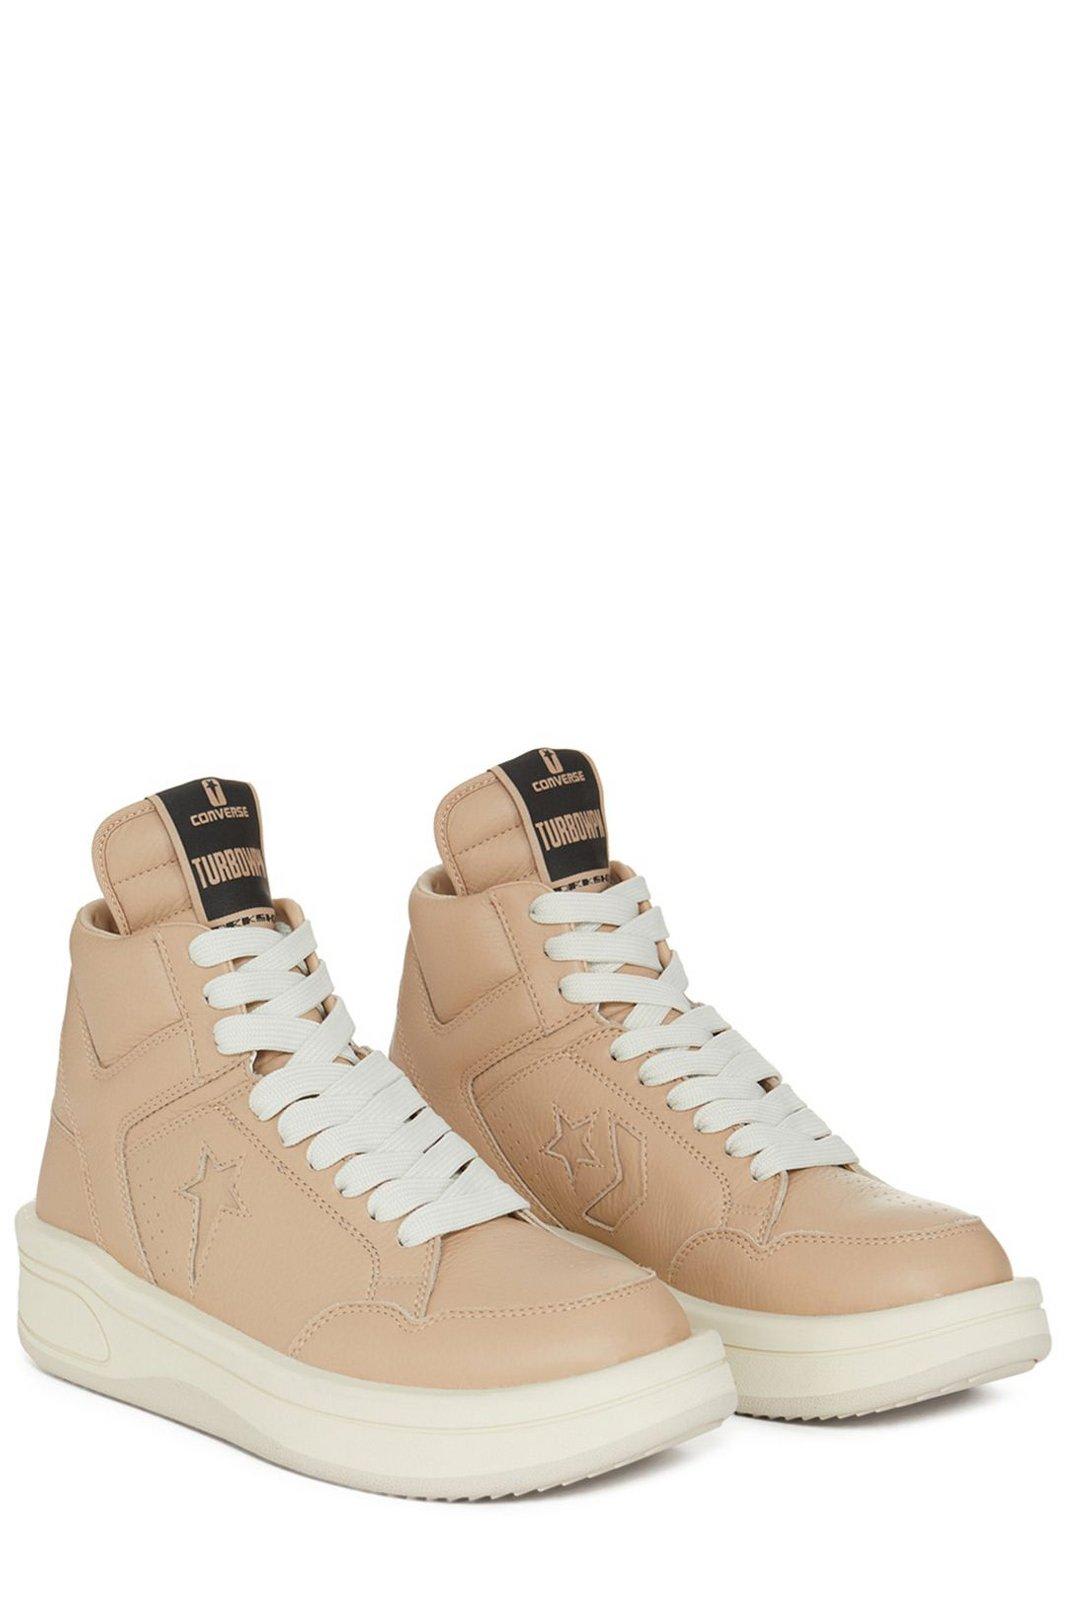 Shop Drkshdw X Converse High-top Lace-up Sneakers In Cave